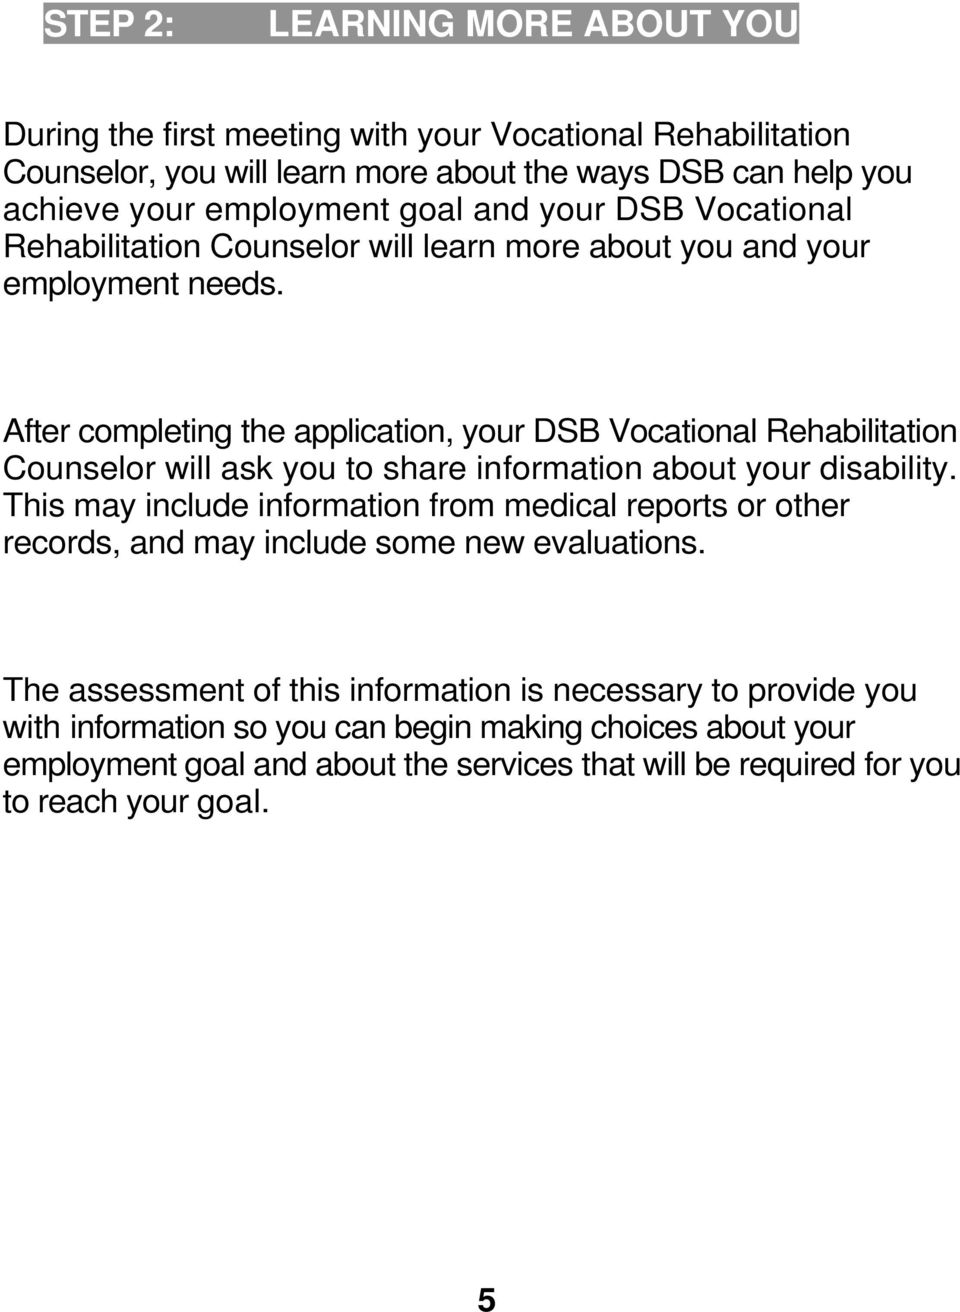 After completing the application, your DSB Vocational Rehabilitation Counselor will ask you to share information about your disability.